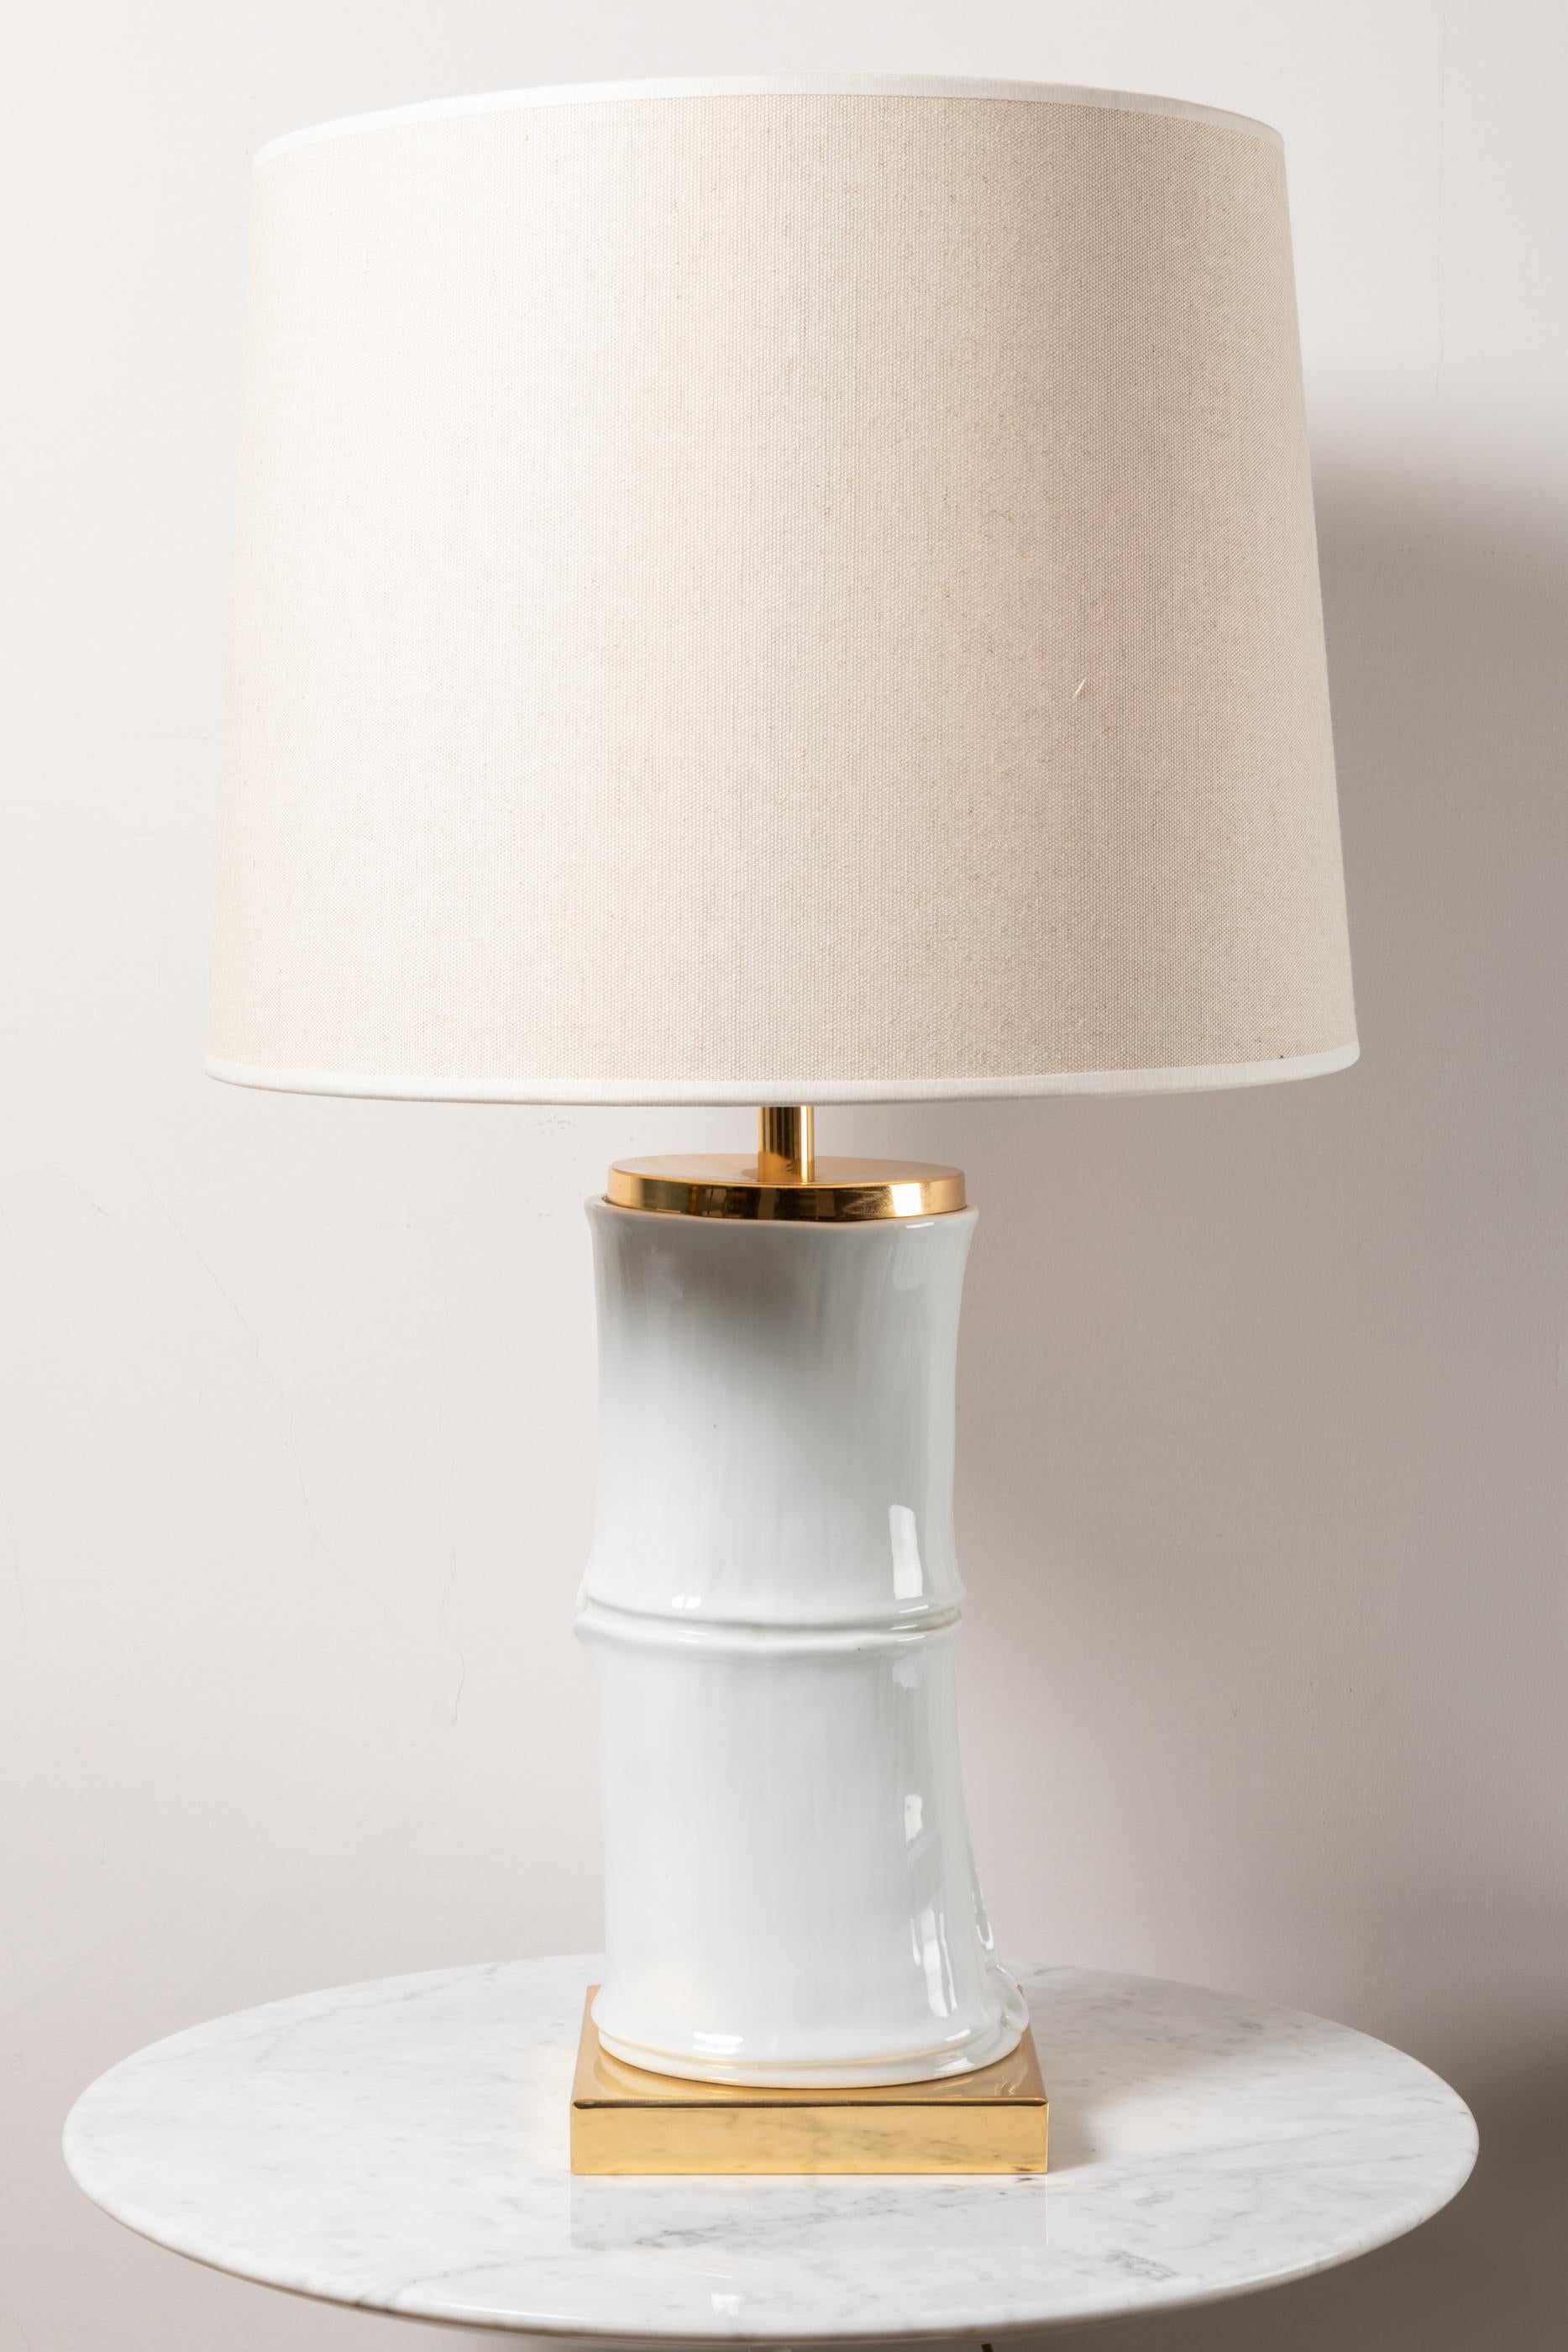 Porcelain bamboo lamp and brass base.
The porcelain by Capodimonte fabric in Napoli, marked.
Italy, 1960's
New shade.

Measures: Height total: 69 cm / 27.1 in. ( adjustable height )
Diameter shade: 40 cm / 15.7 in.